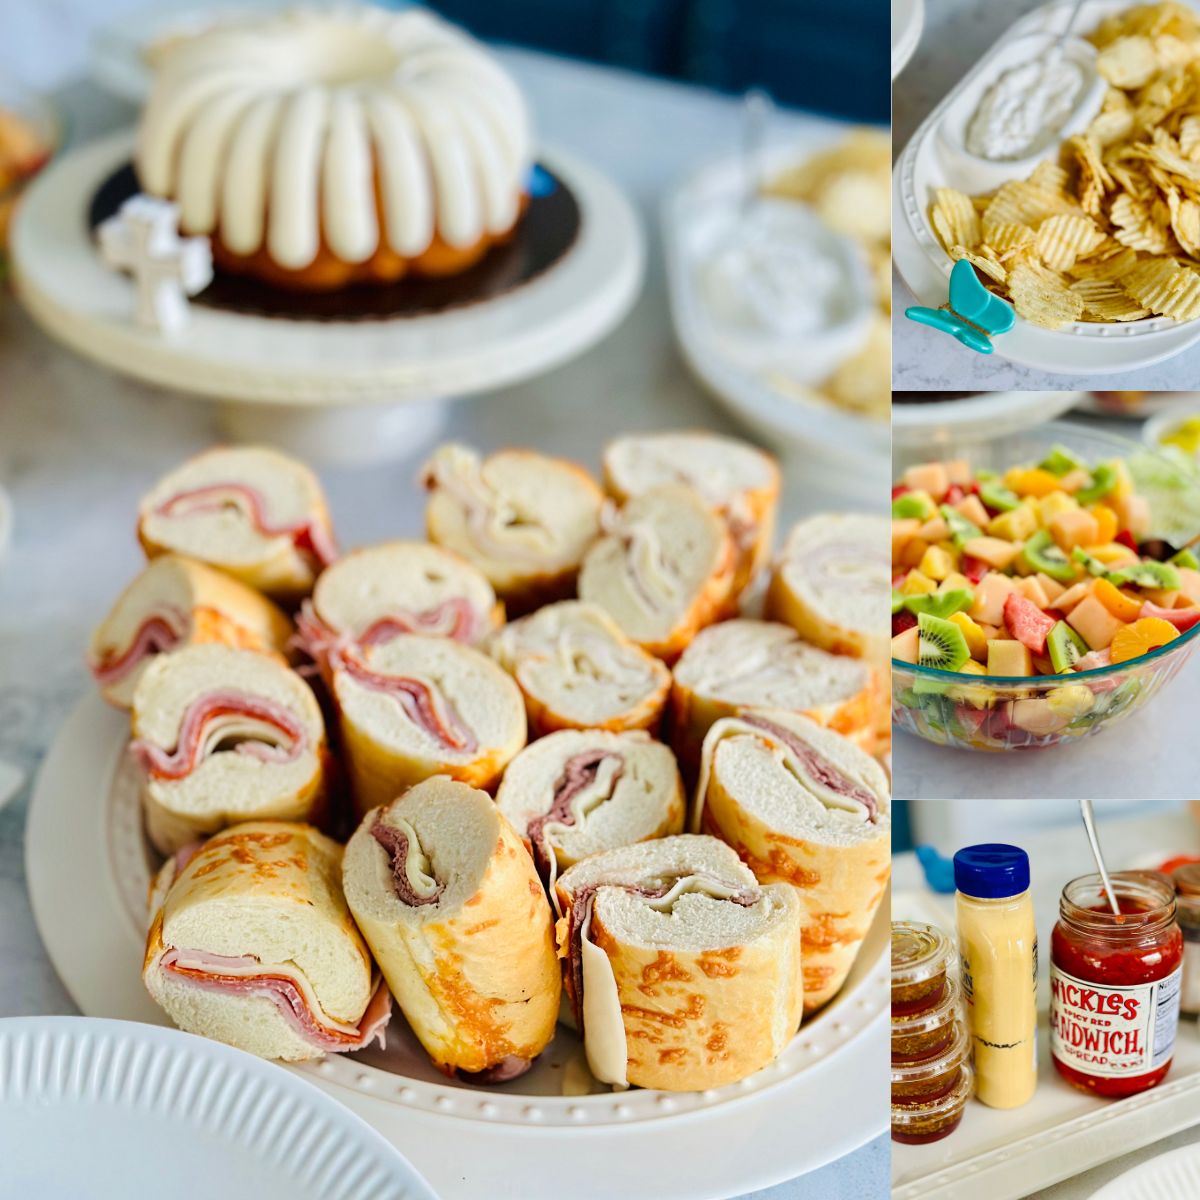 The photo collage shows a platter of party sub sandwiches next to easy side dishes to serve.